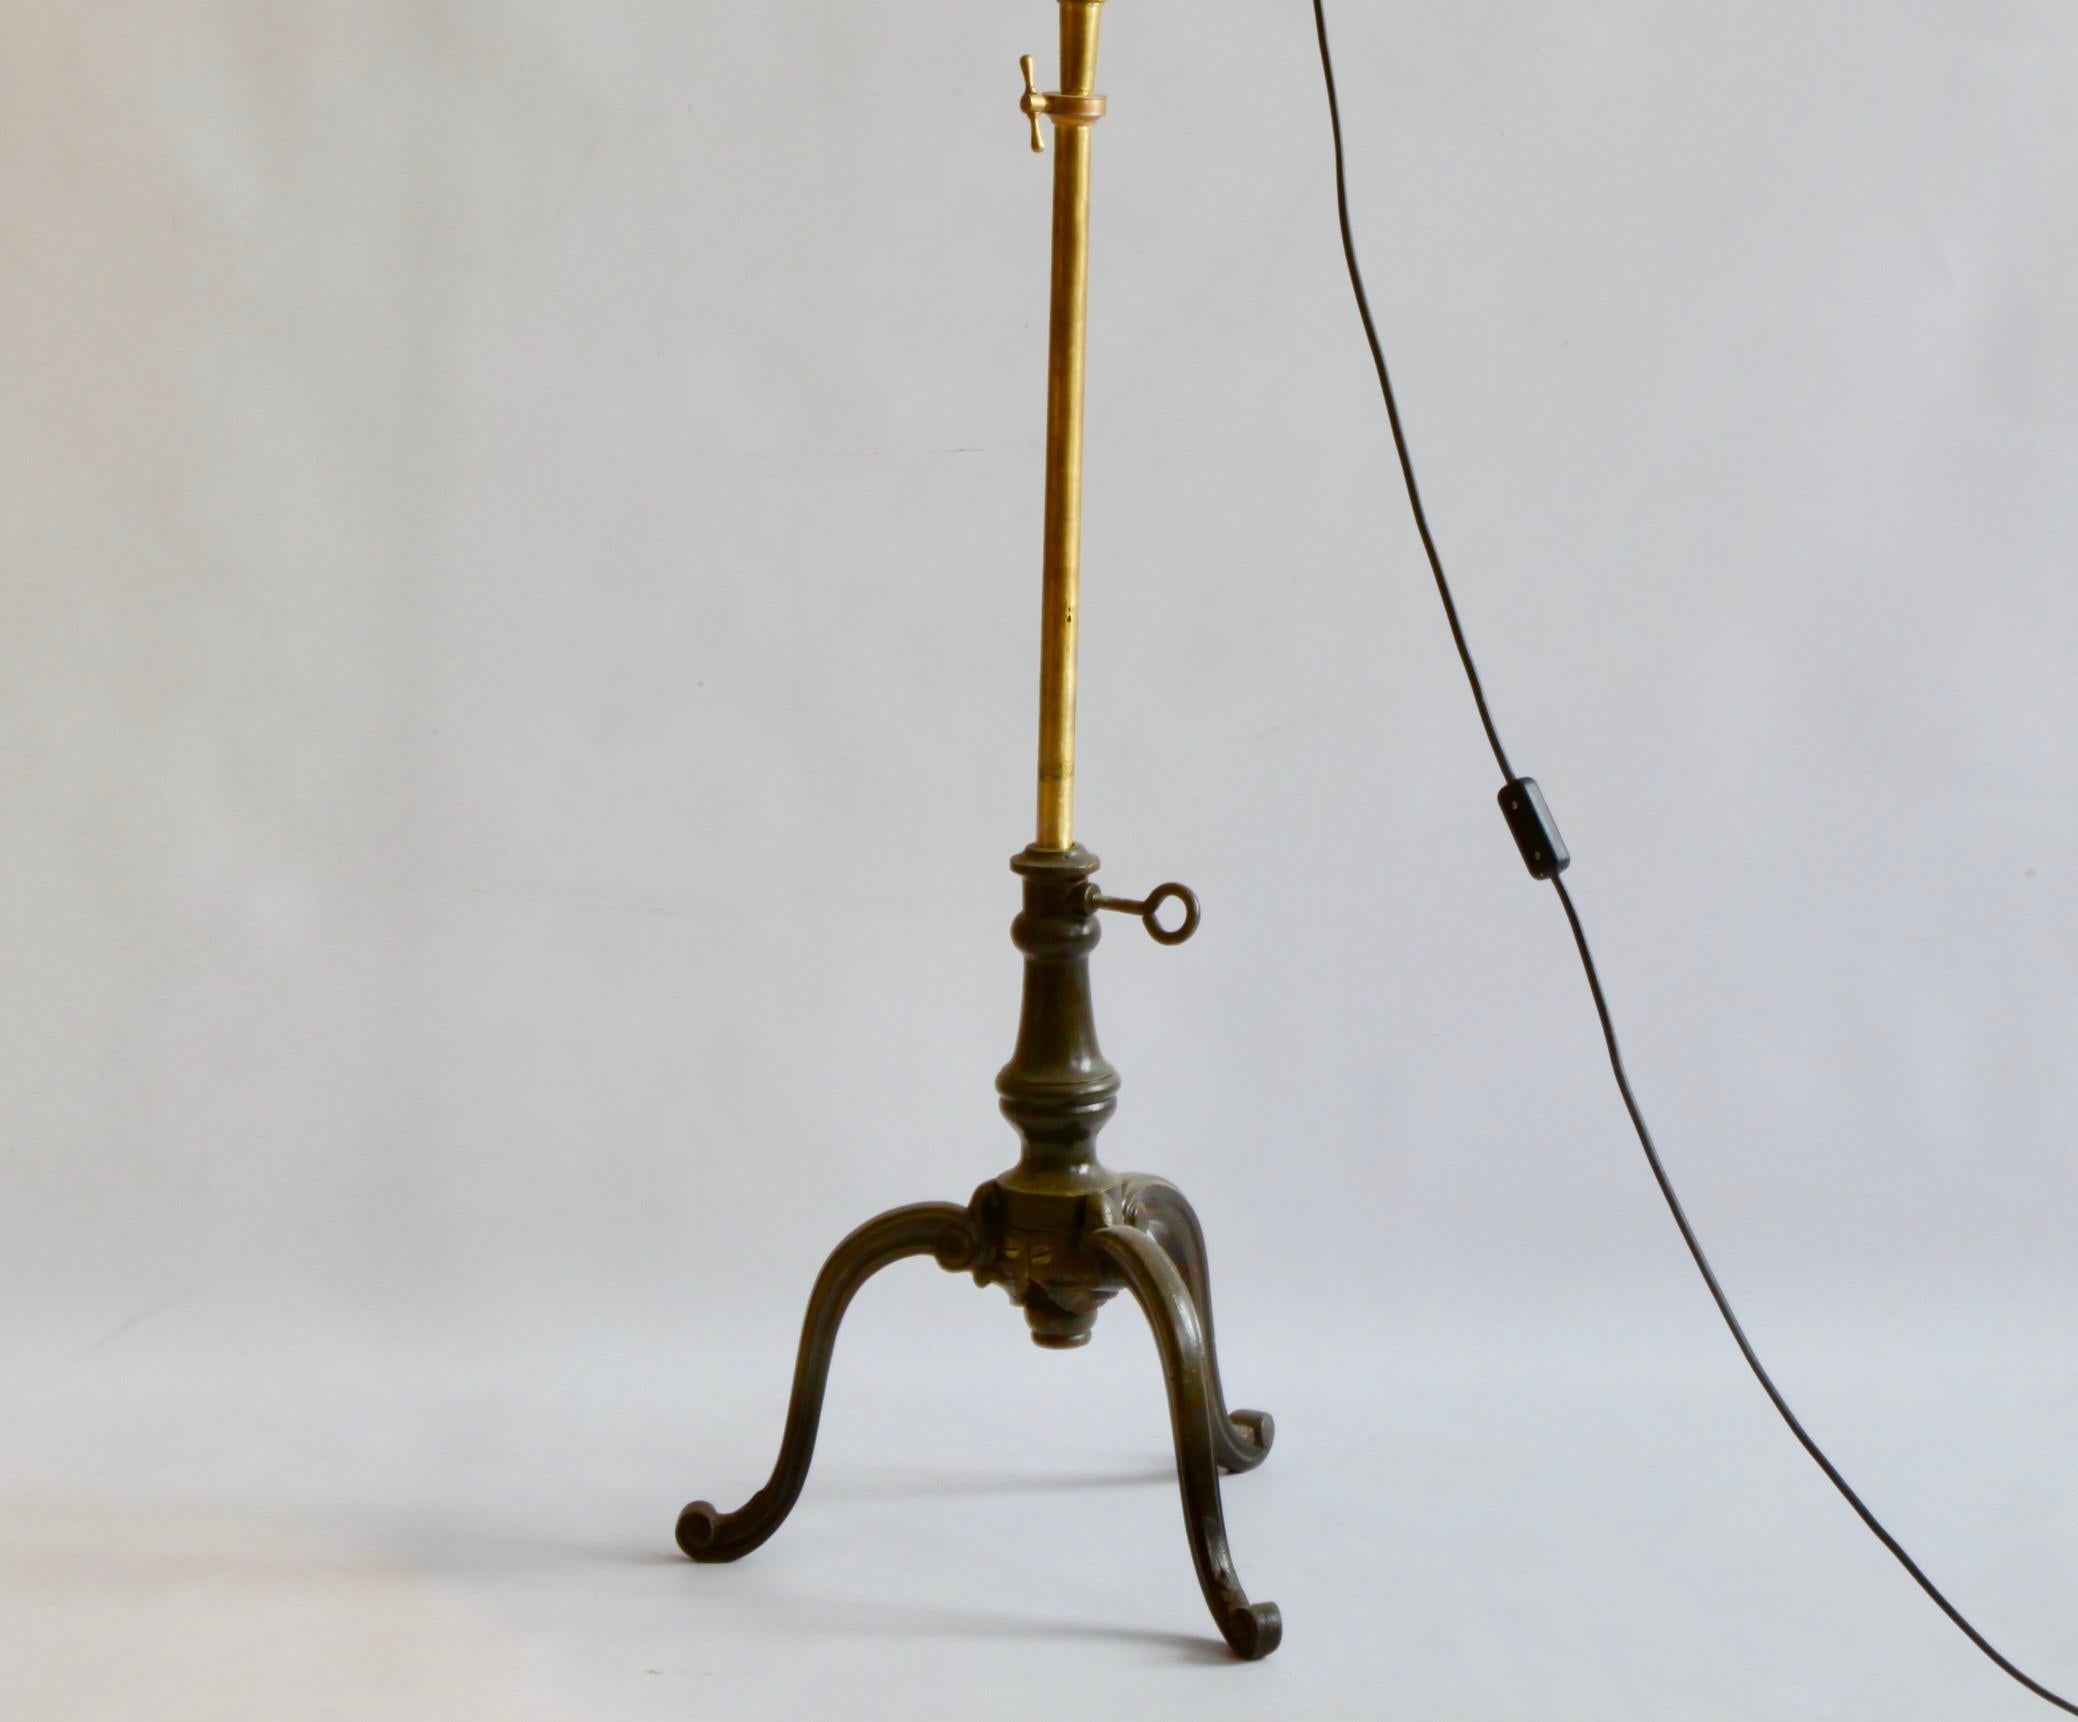 Midcentury French Industrial Freestanding Light In Good Condition For Sale In London, Park Royal